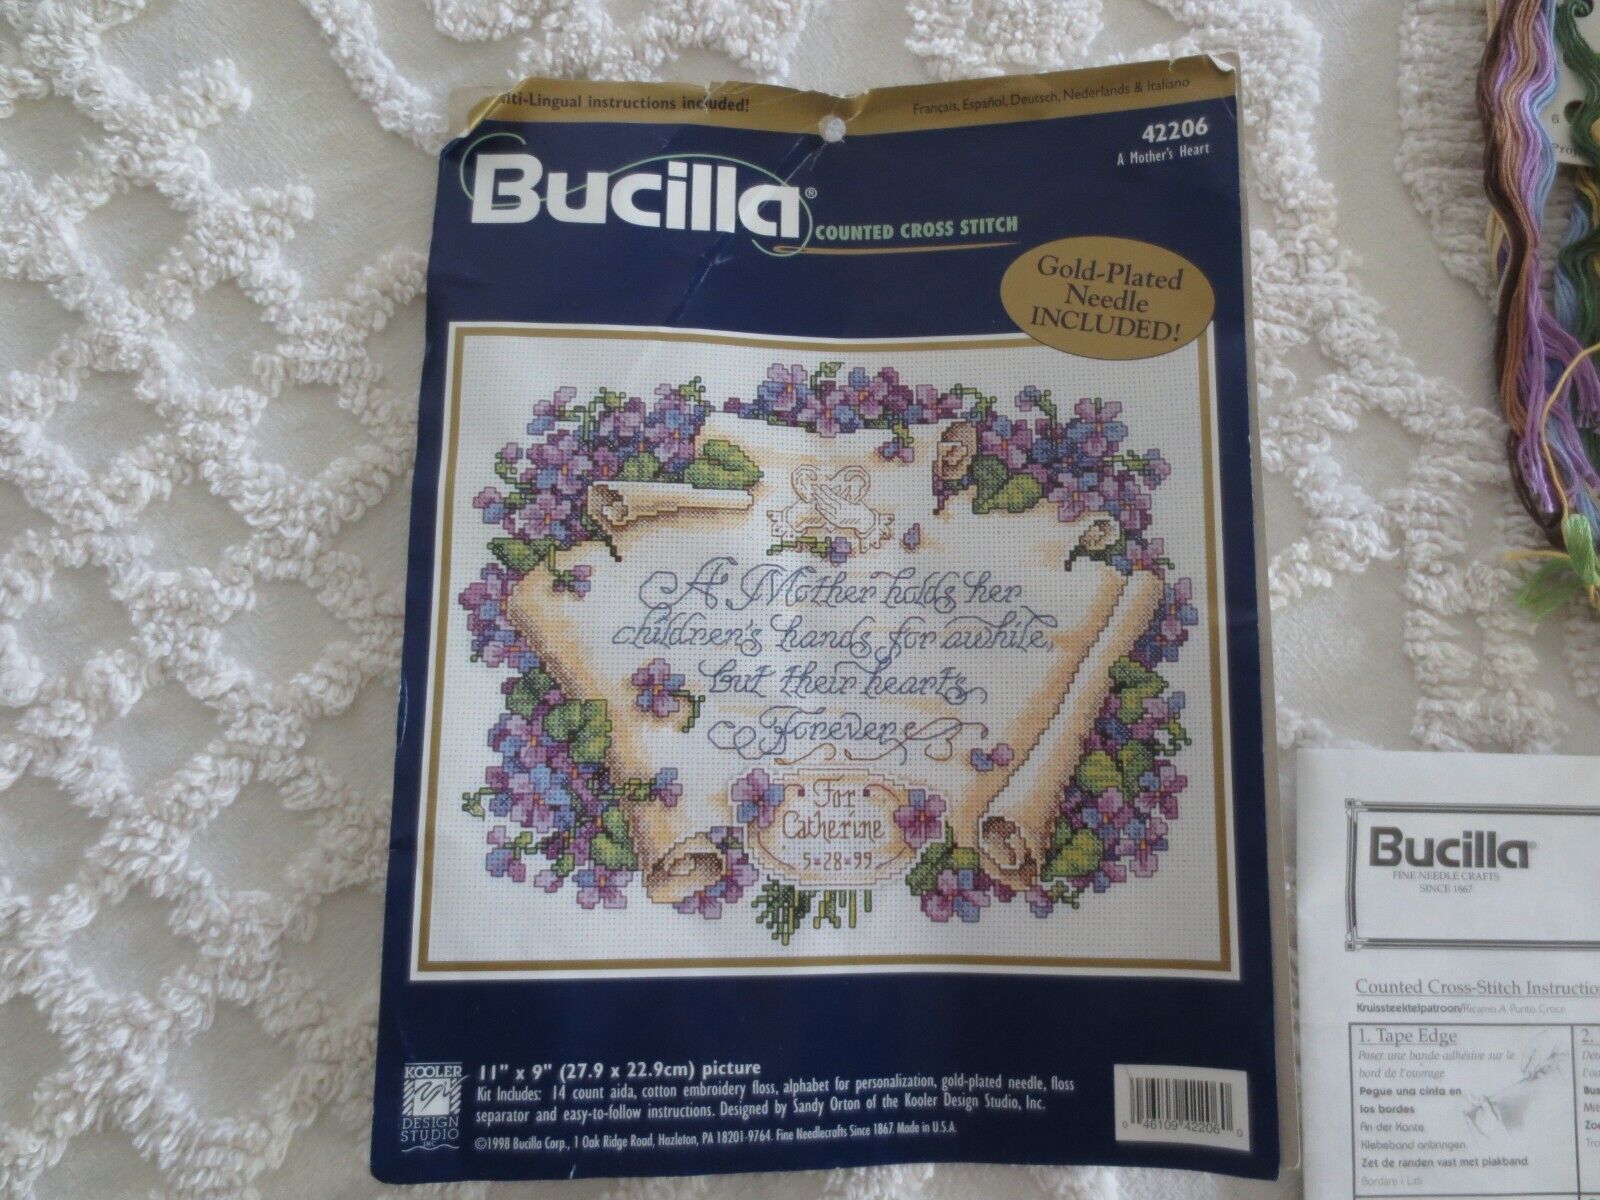 COMPLETE Bucilla A MOTHER'S HEART Counted Cross Stitch Kit #42206 - 11" x 9" - $12.00